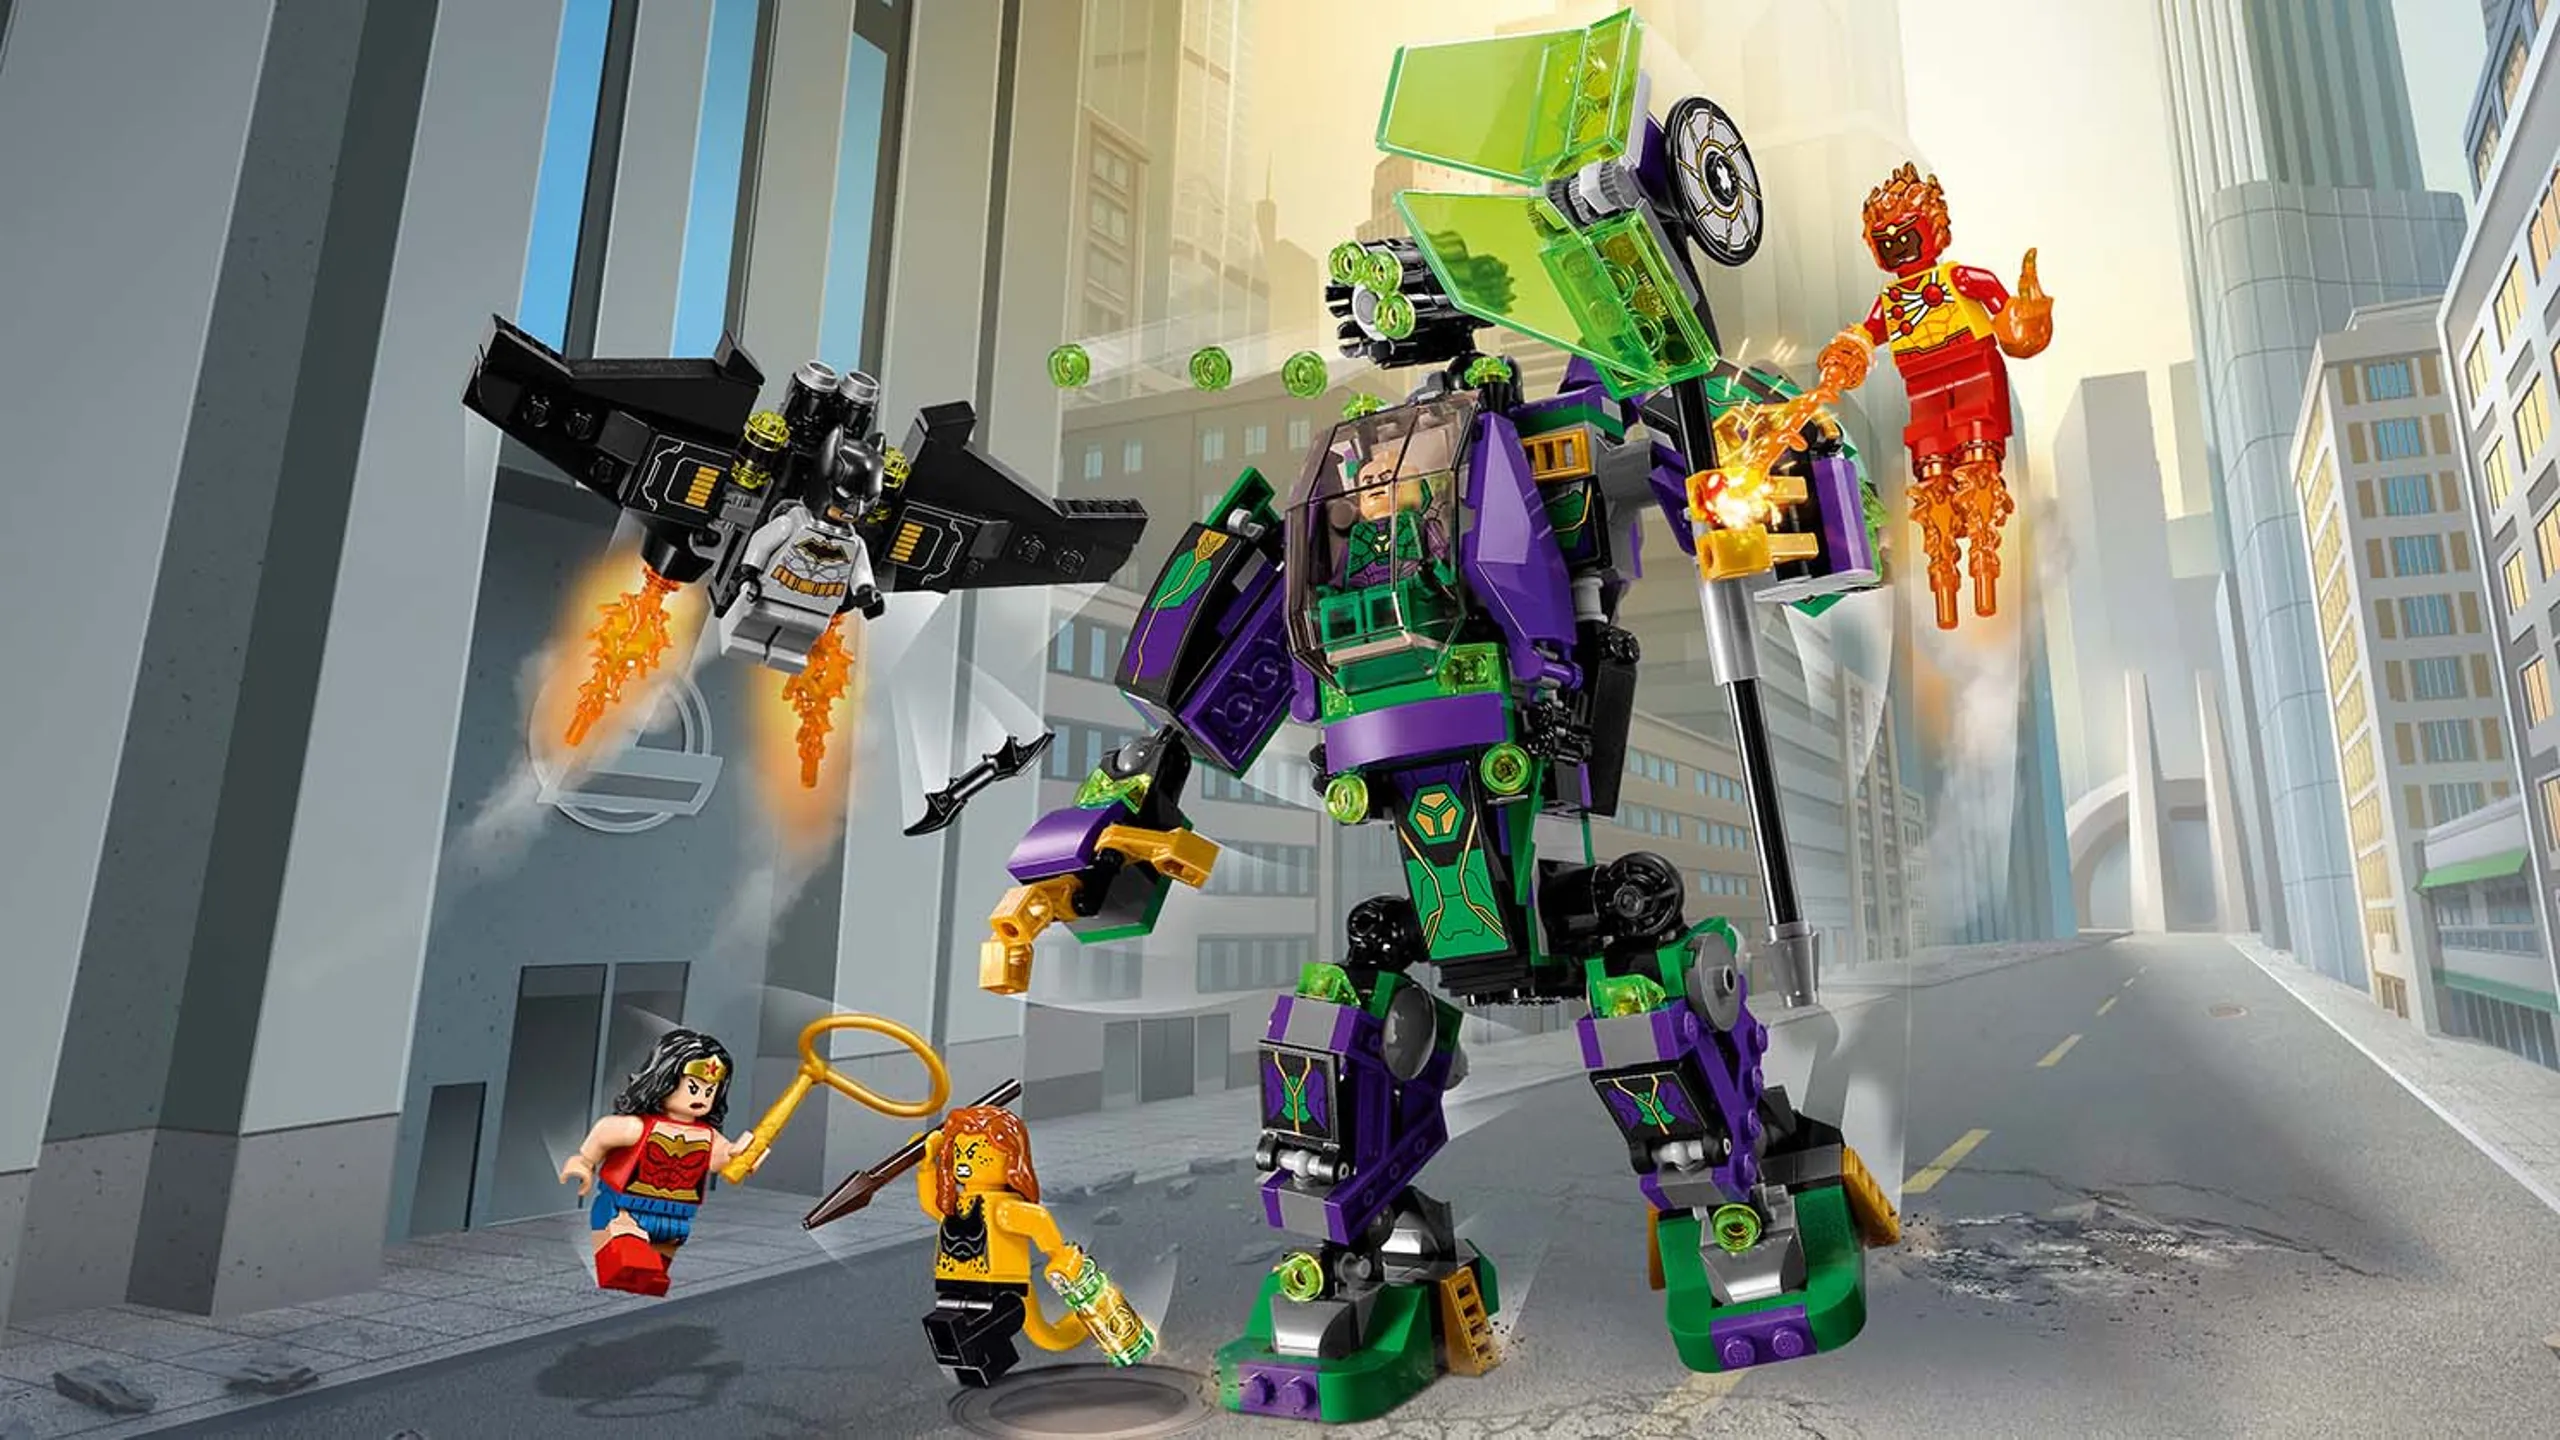 LEGO DC Super Heroes Lex Luthor Mech Takedown - 76097 - This action-packed set also includes Batman’s Bat Glider with 2 stud shooters, the buildable green Power Unit, 5 minifigures plus assorted translucent-orange Power Burst elements to customize your builds and minifigures.